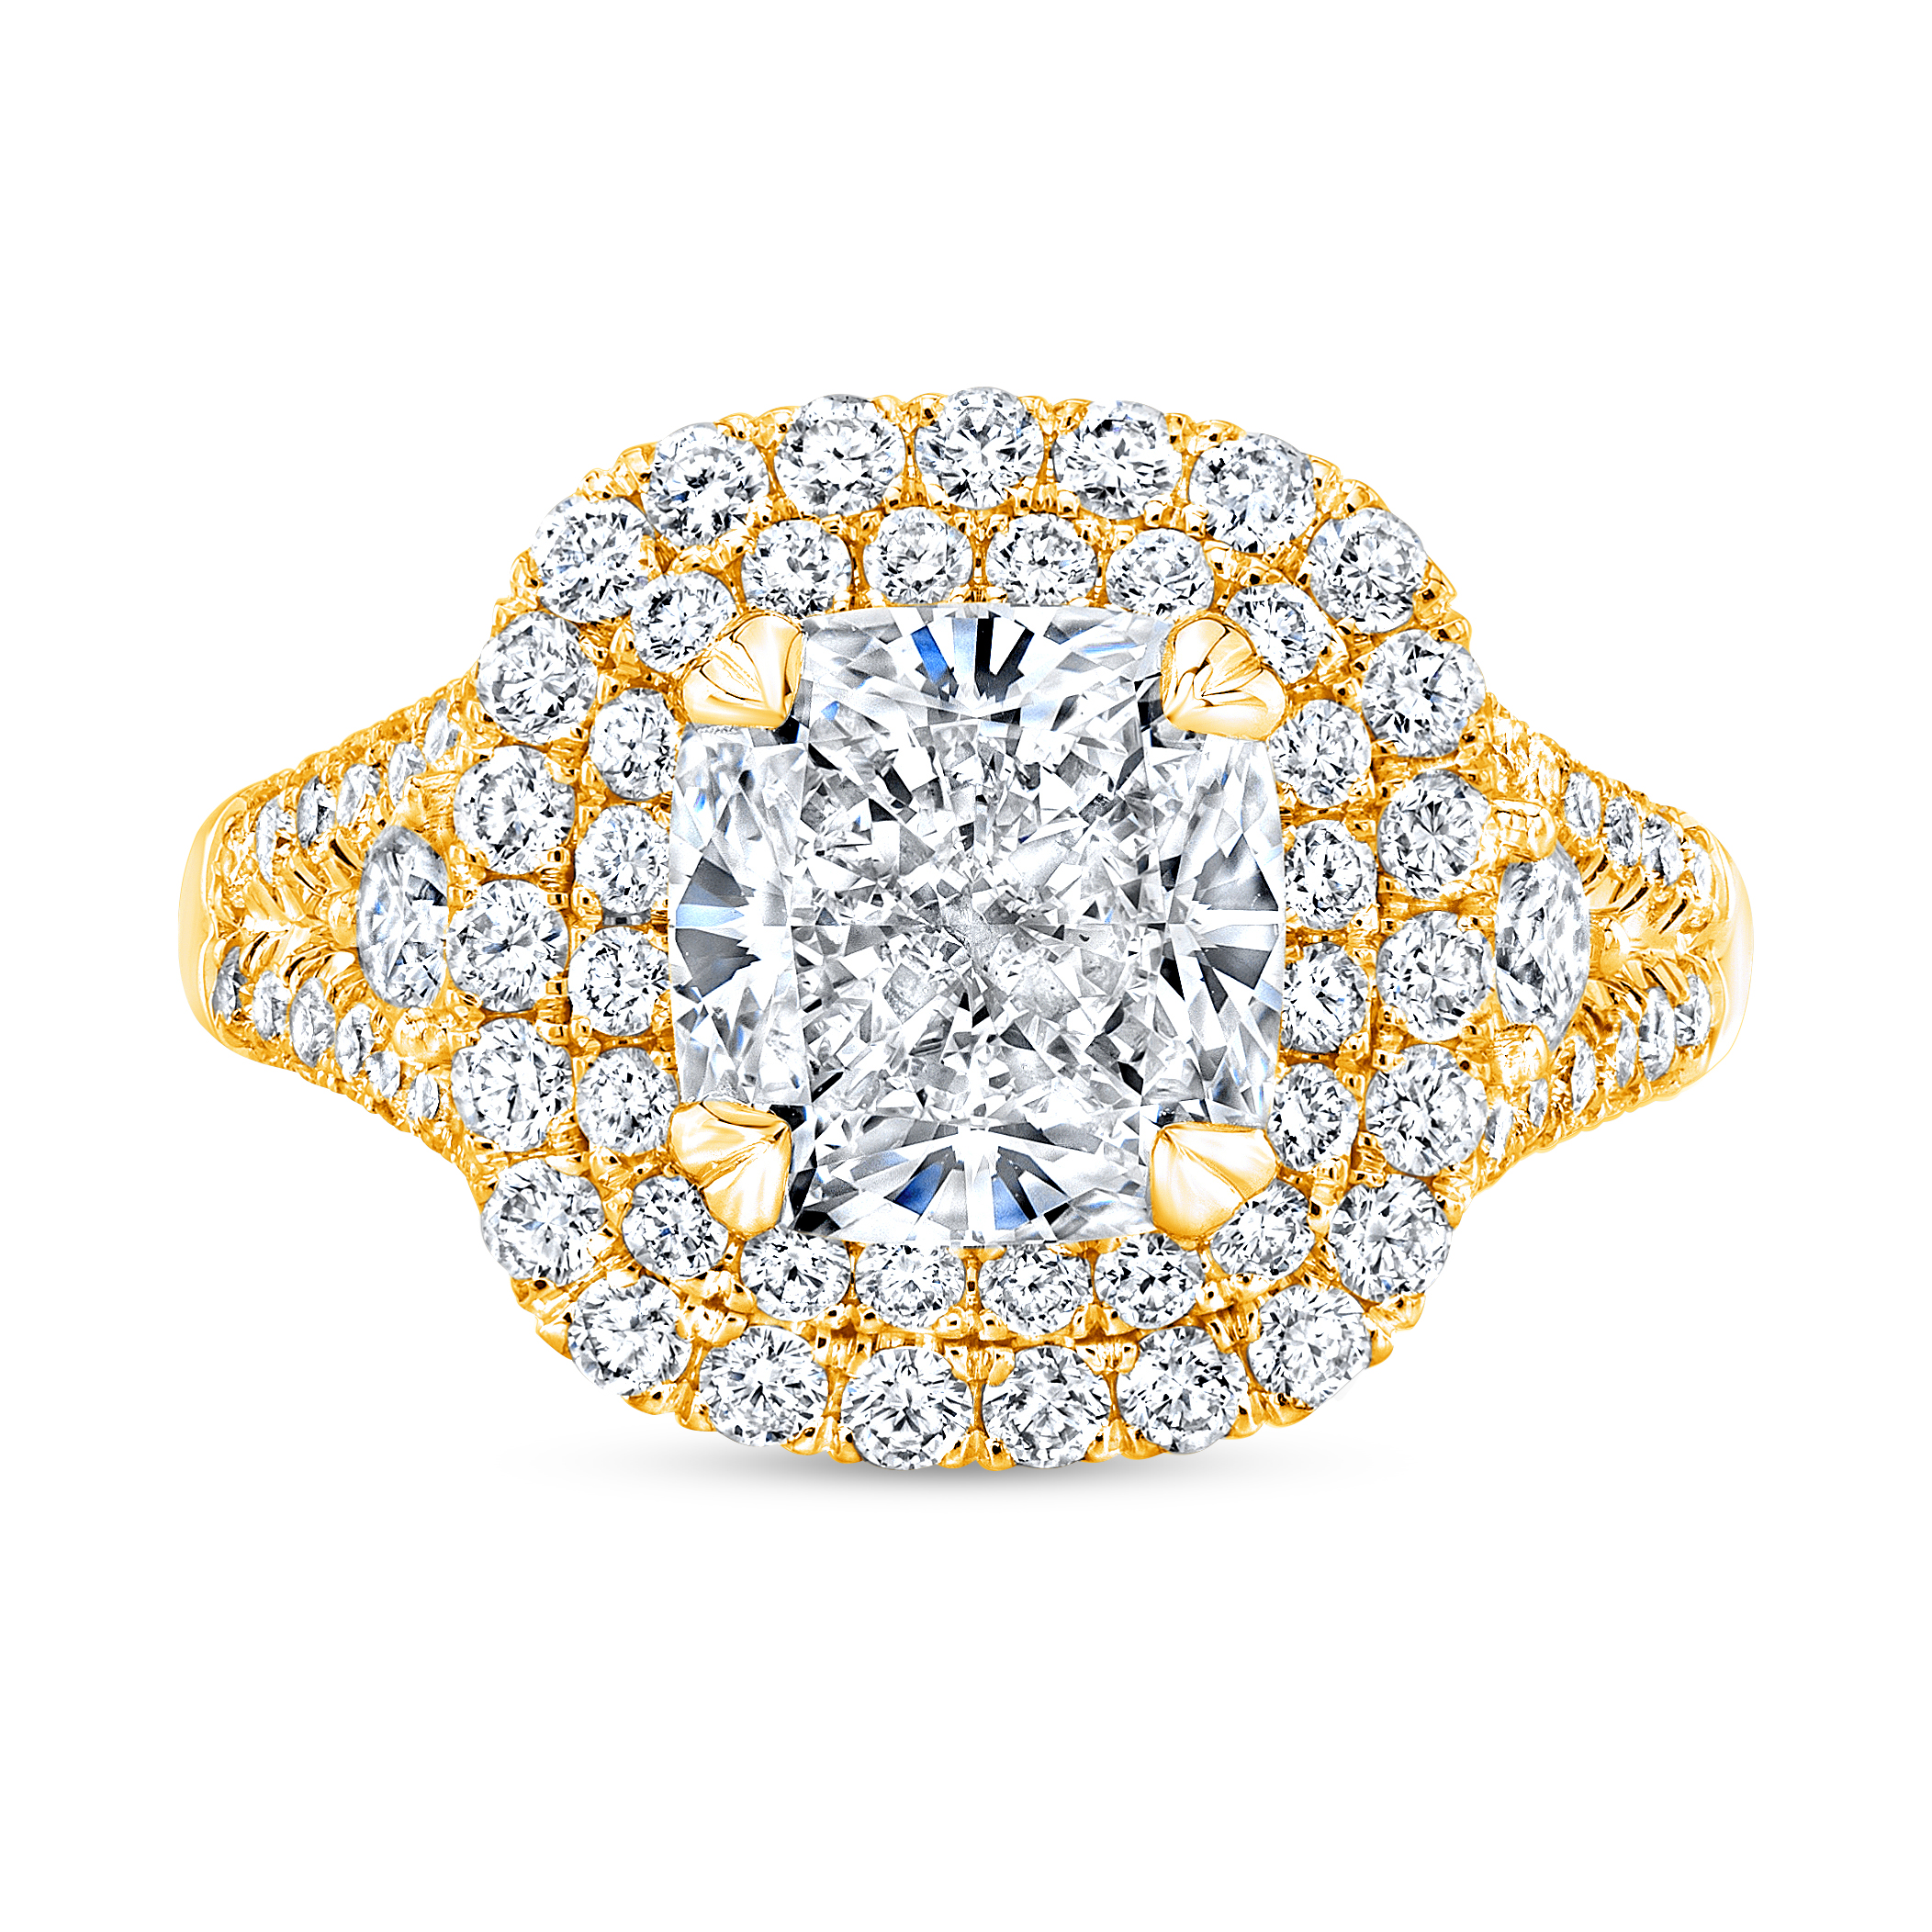 Double Halo Split Shank Micro Pave Diamond Engagement Ring in yellow gold 